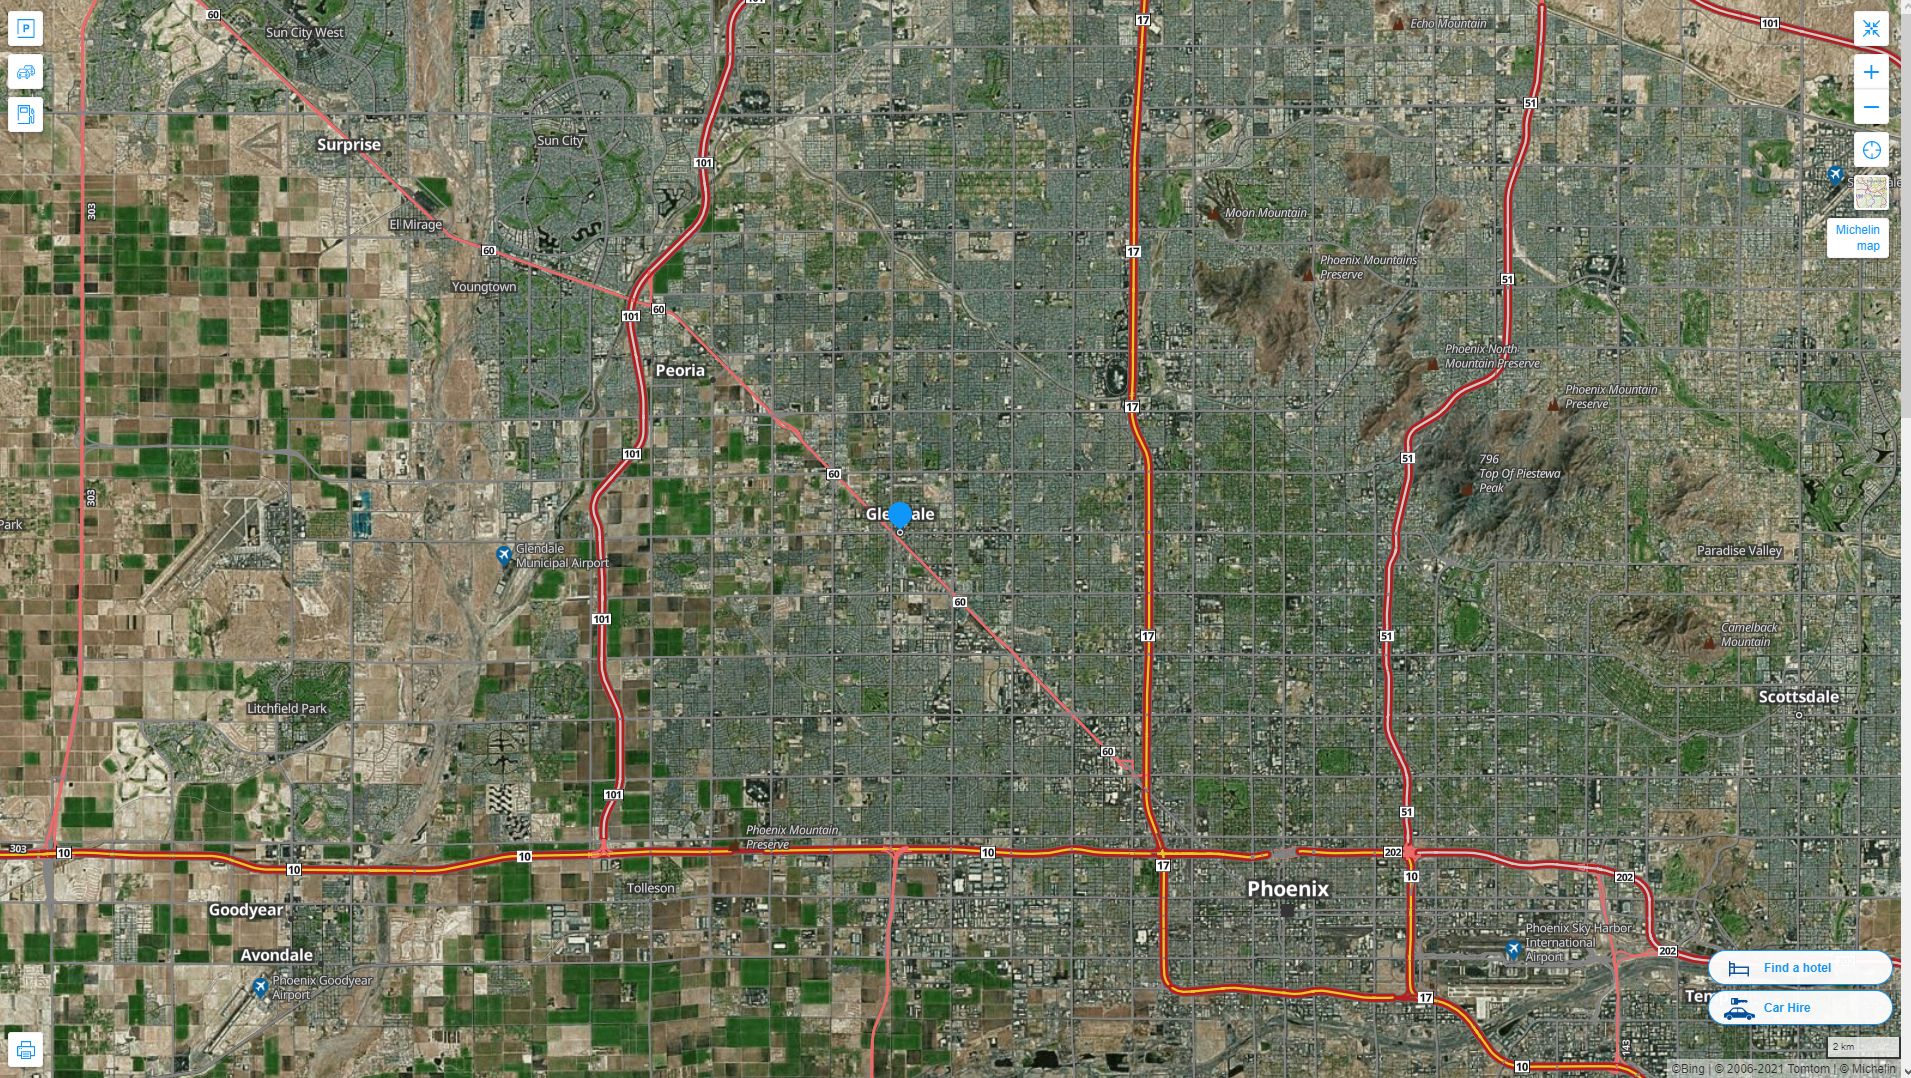 Glendale Arizona Highway and Road Map with Satellite View